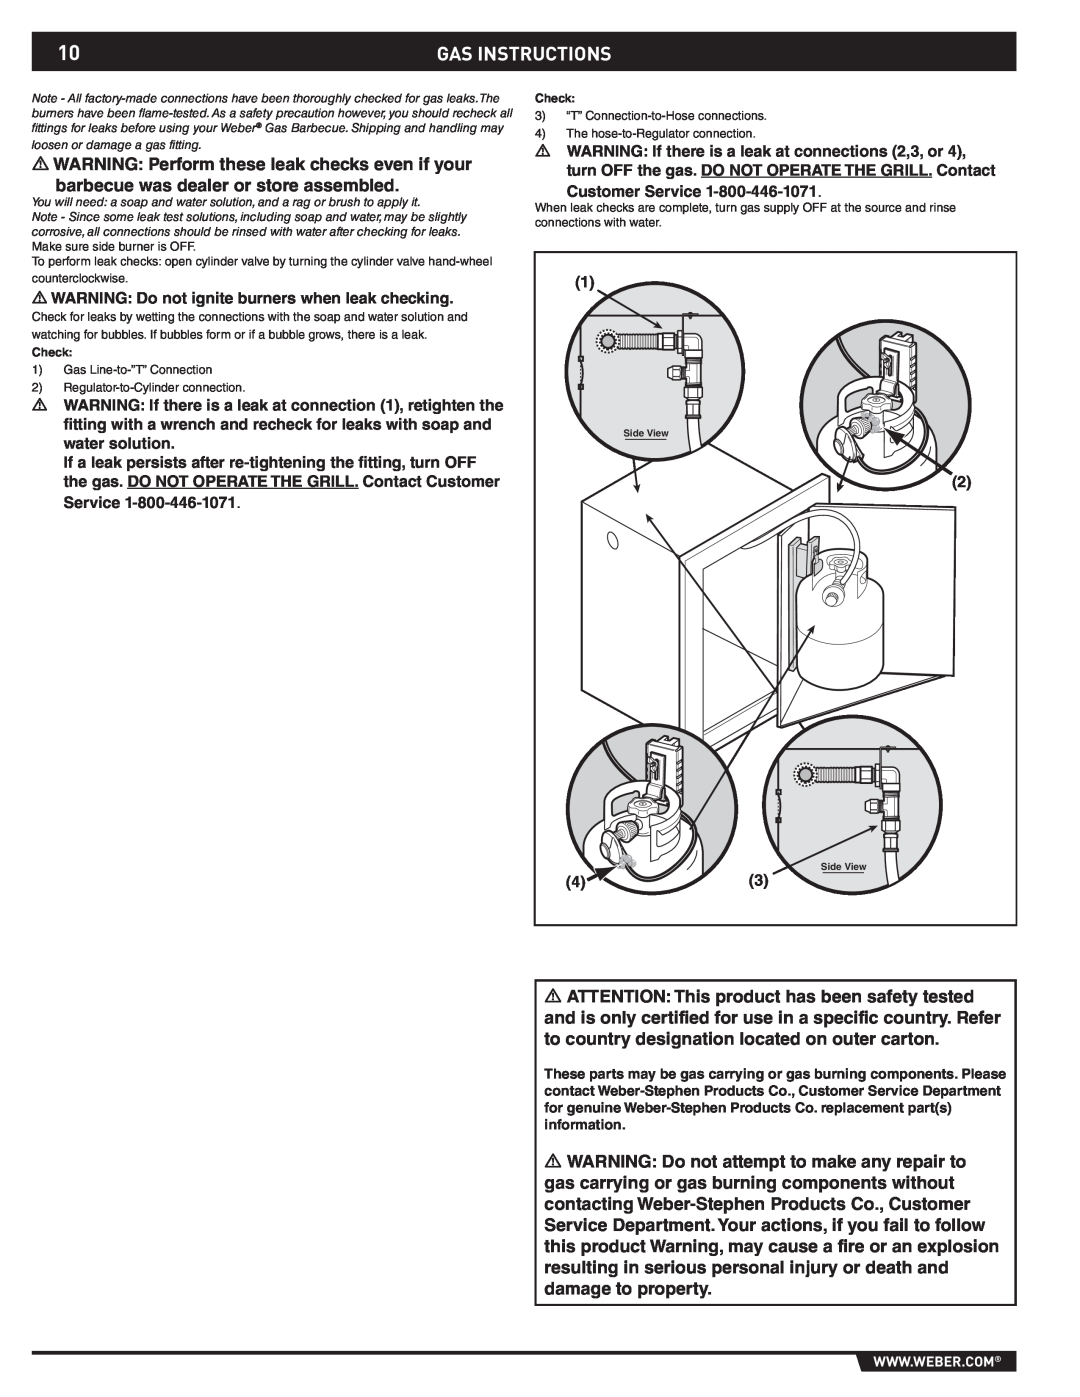 Weber 43176 manual Gas Instructions, WARNING Do not ignite burners when leak checking 